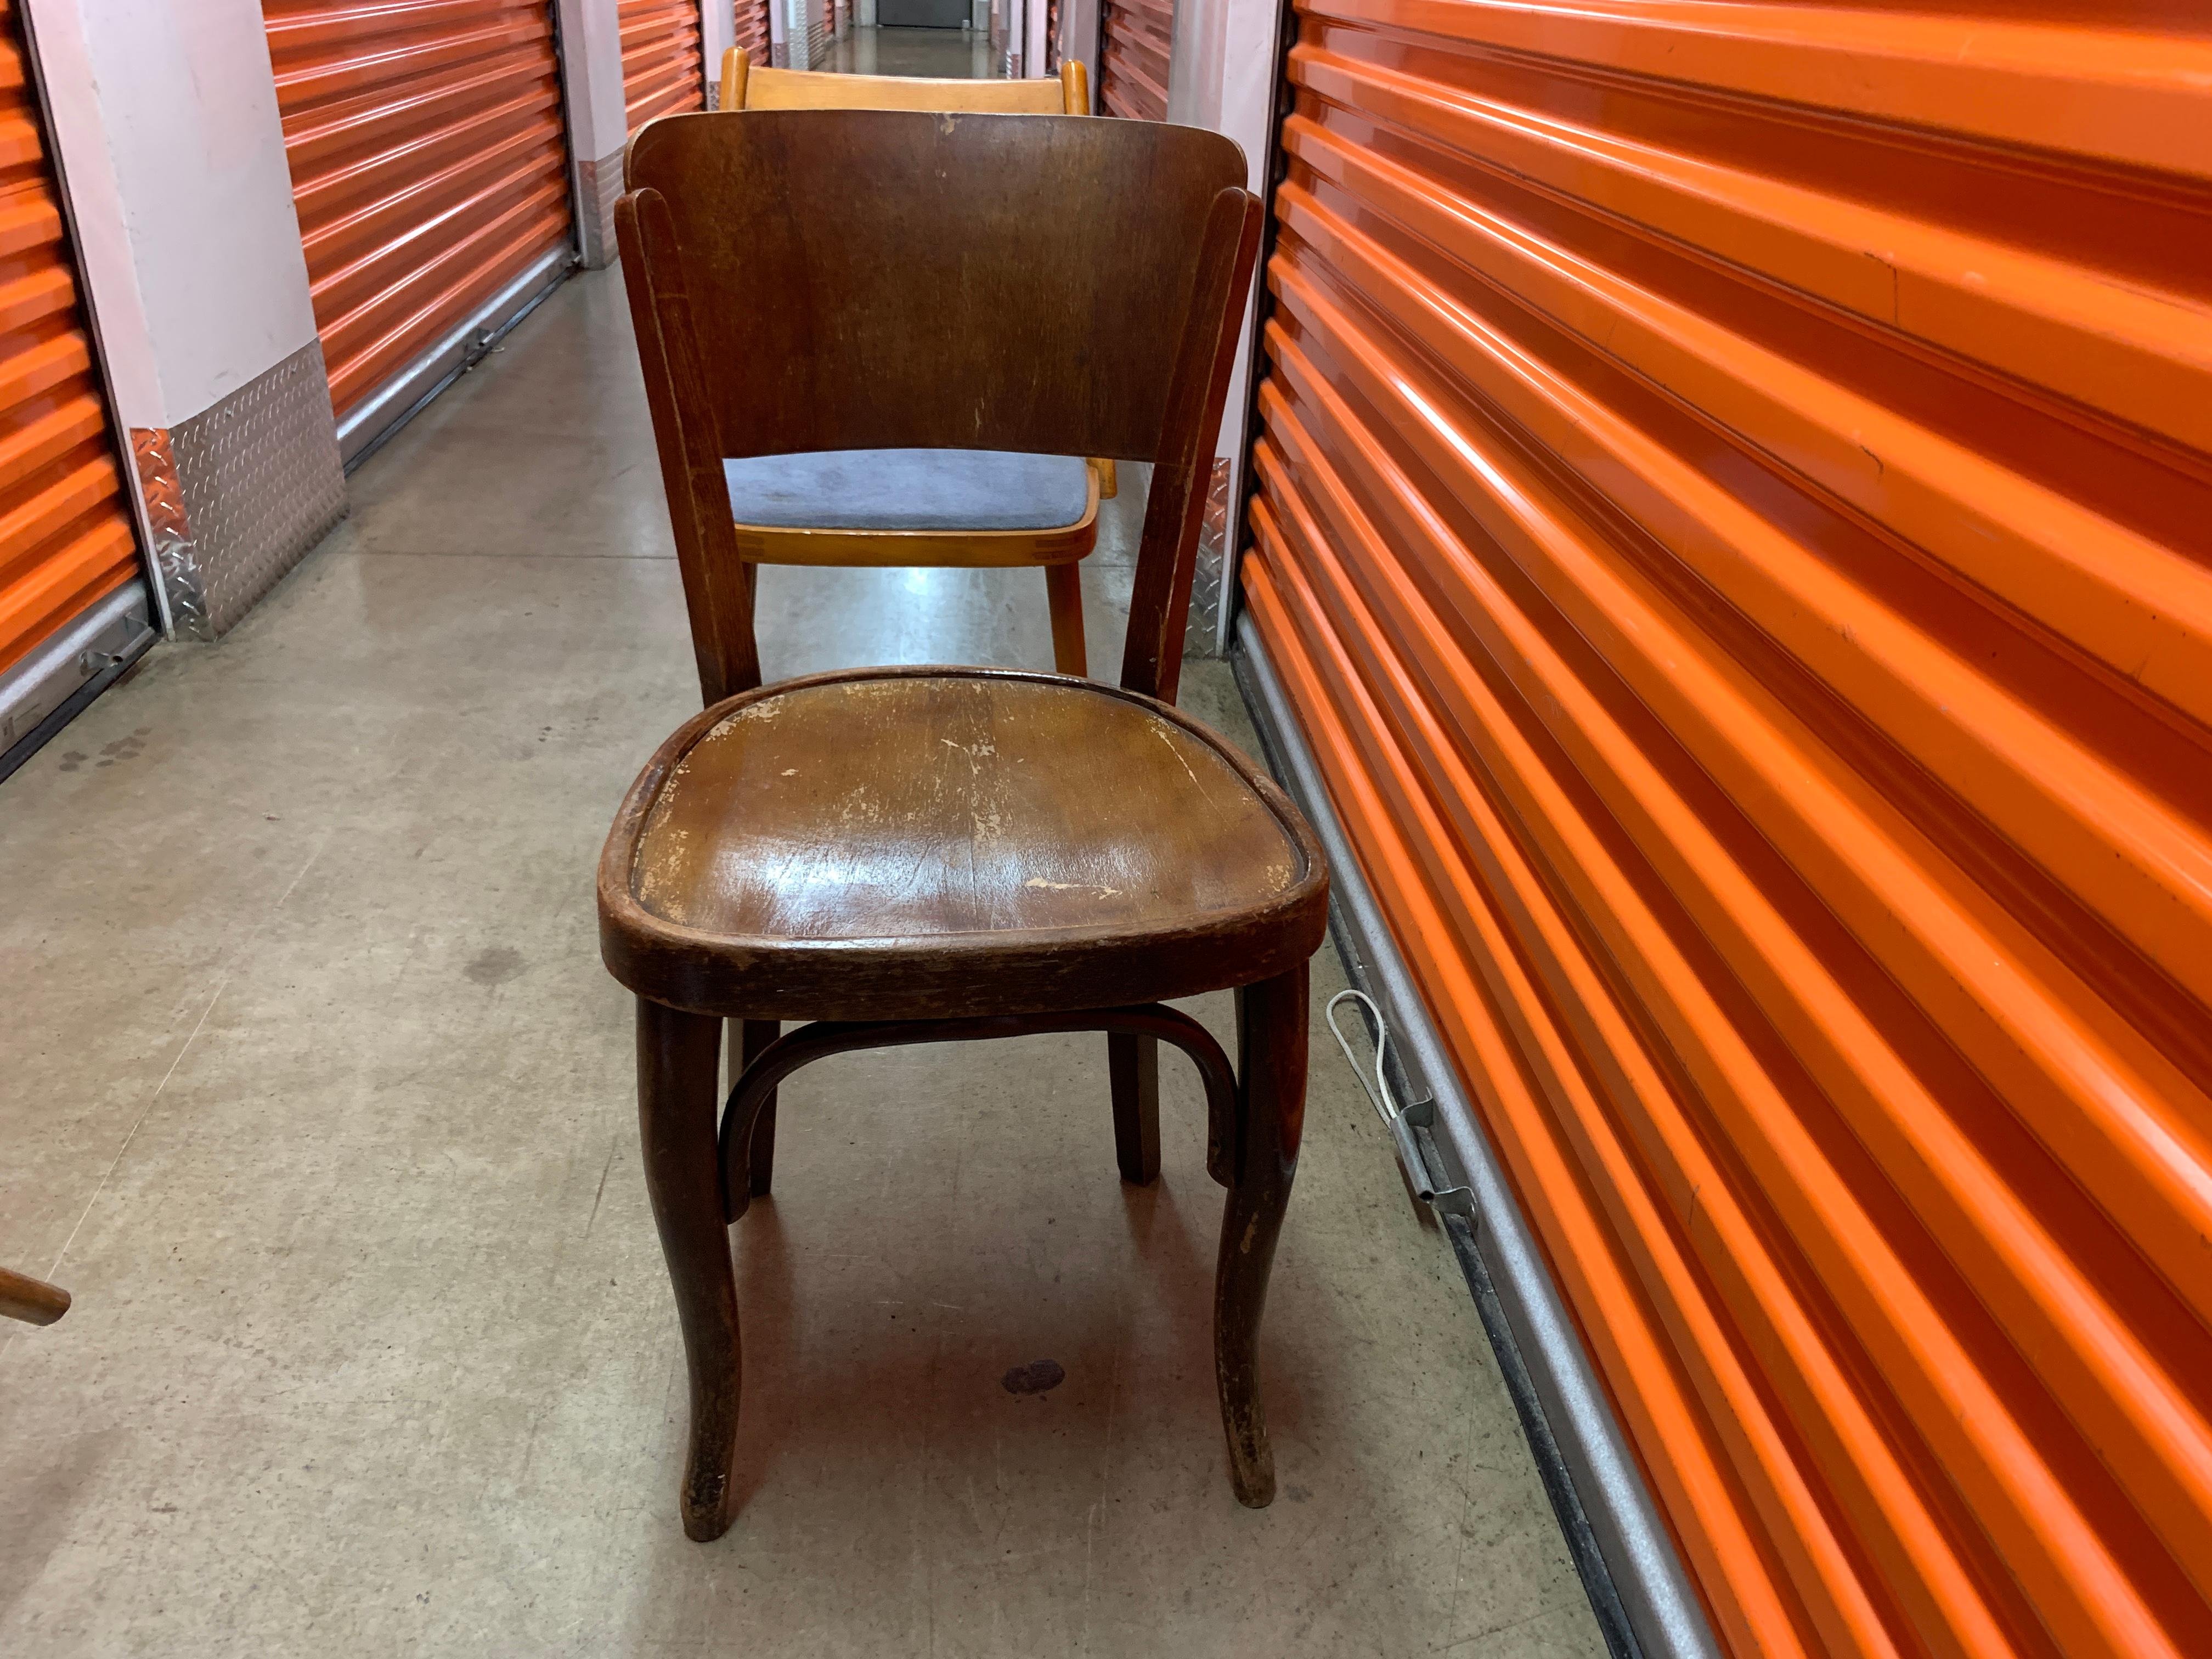 A wonderfully rich colored vintage French dining chair, perfect for a vanity chair or entryway.